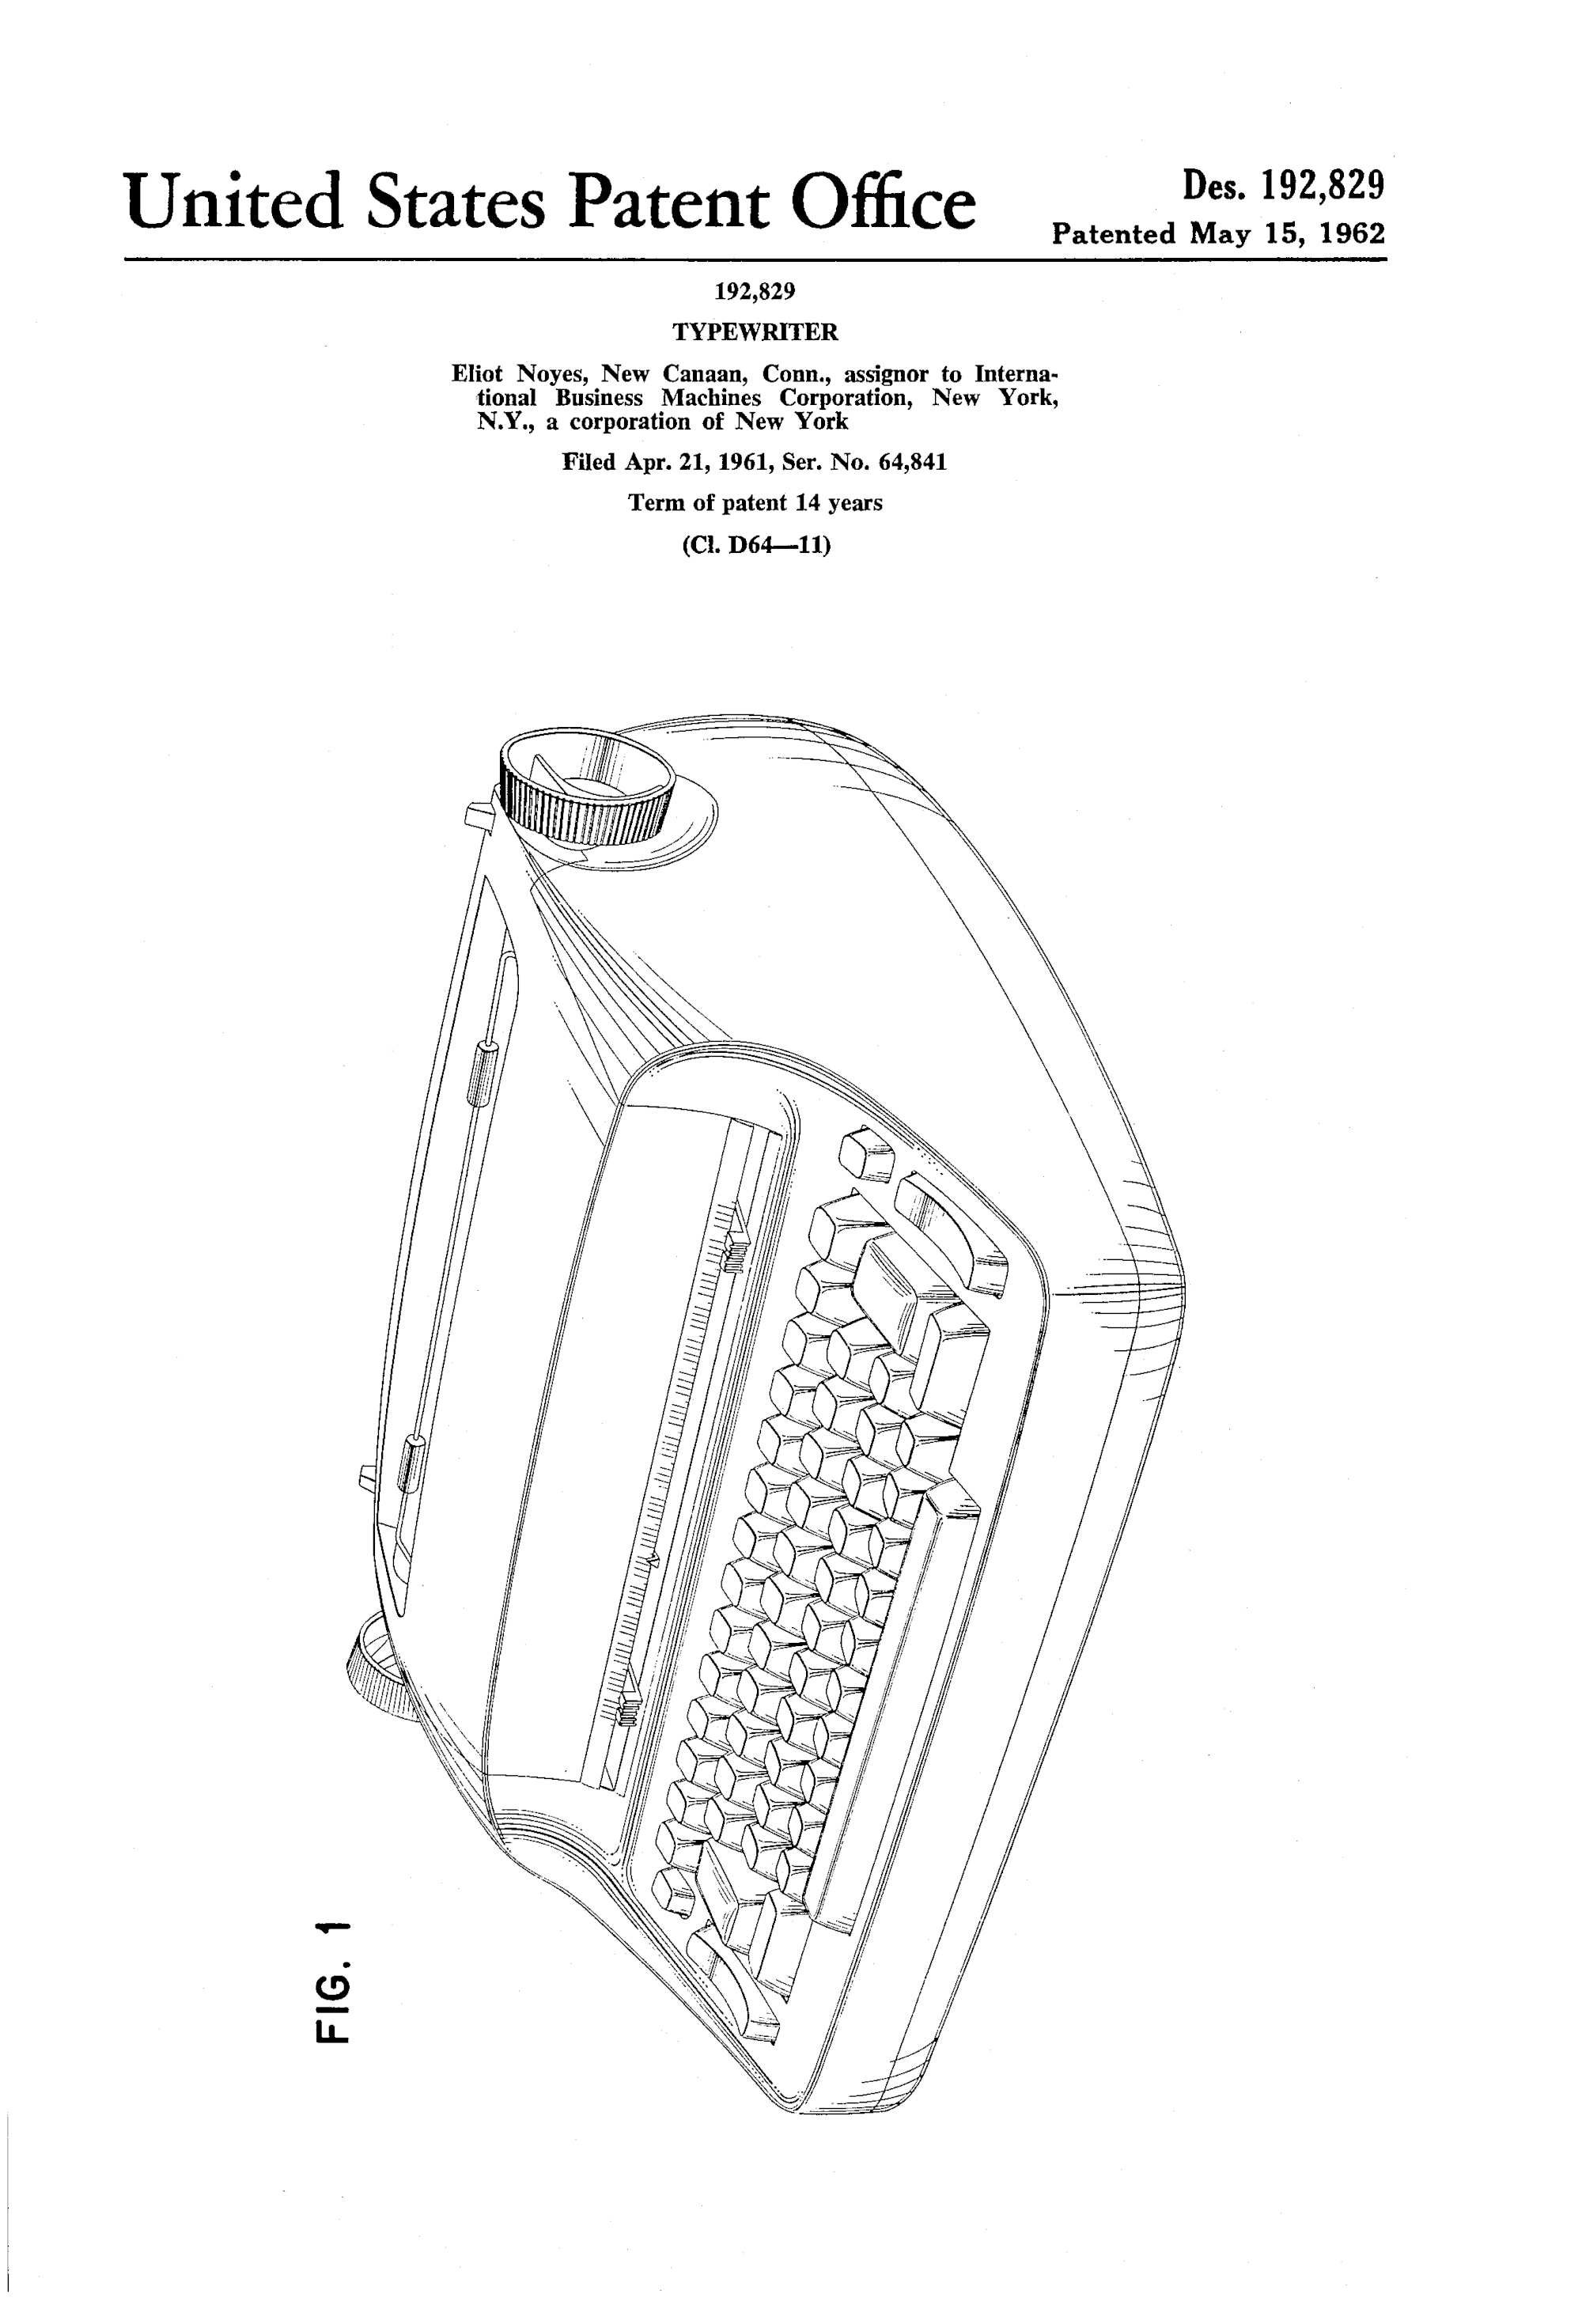 Typewriter, Eliot Noyes, for International Business Machines, Corporation, 1960/1962. Patent Number: USD 192,829, U.S. Patent Office 